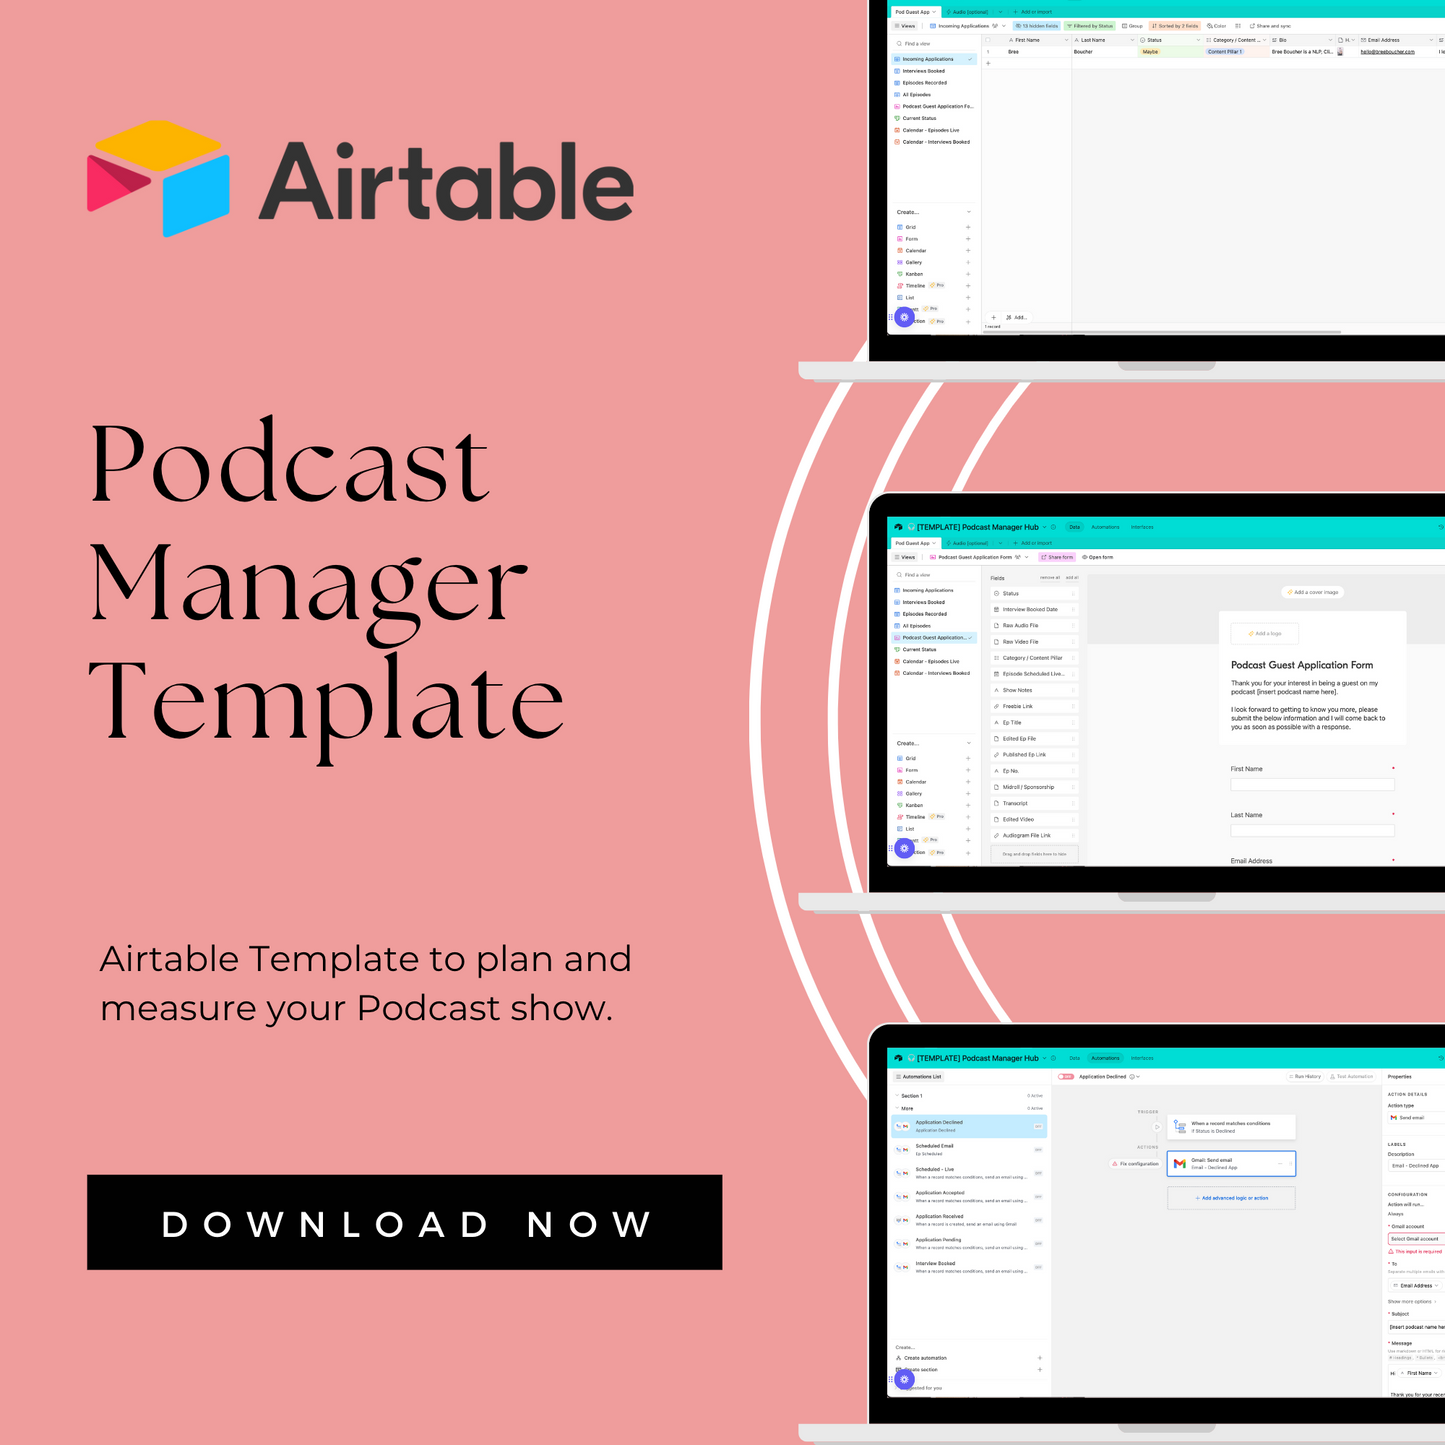 Airtable Podcast Manager Template